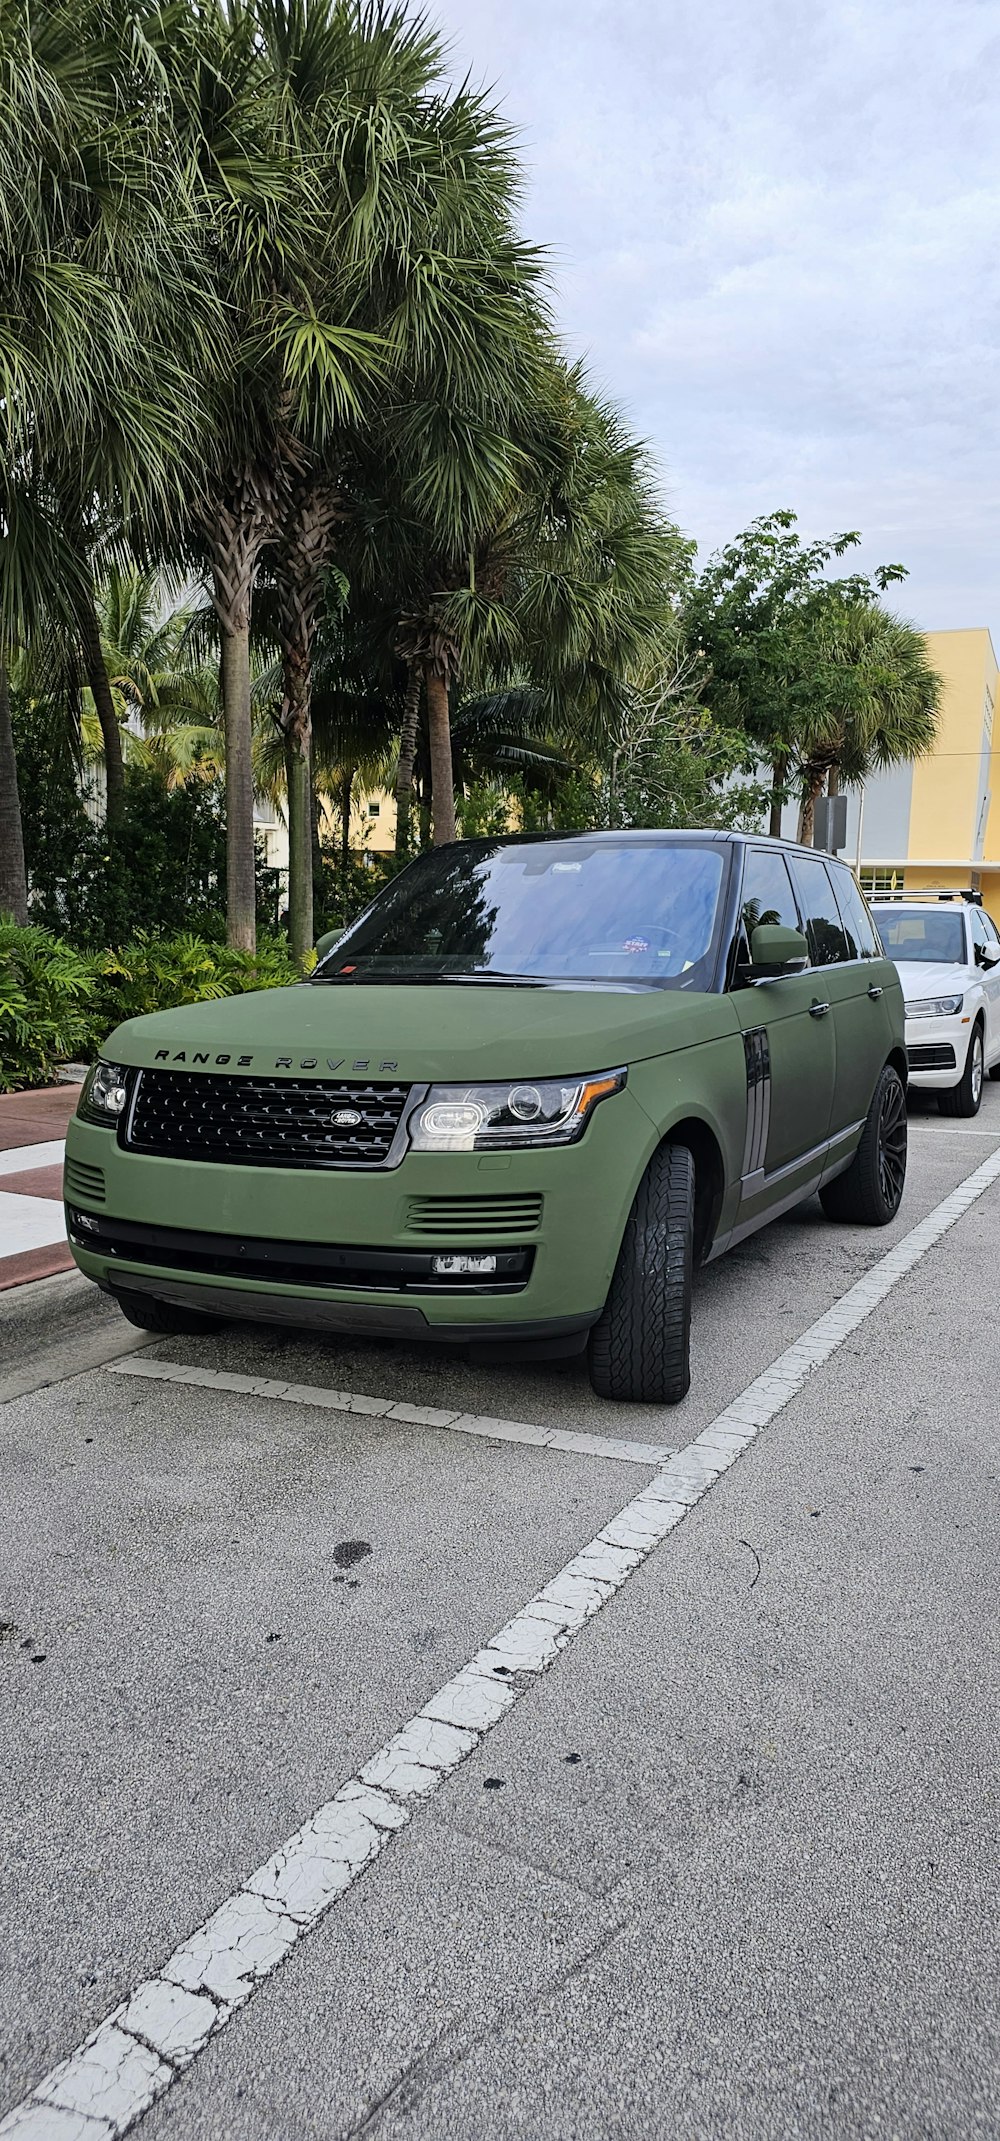 a green range rover parked in a parking lot